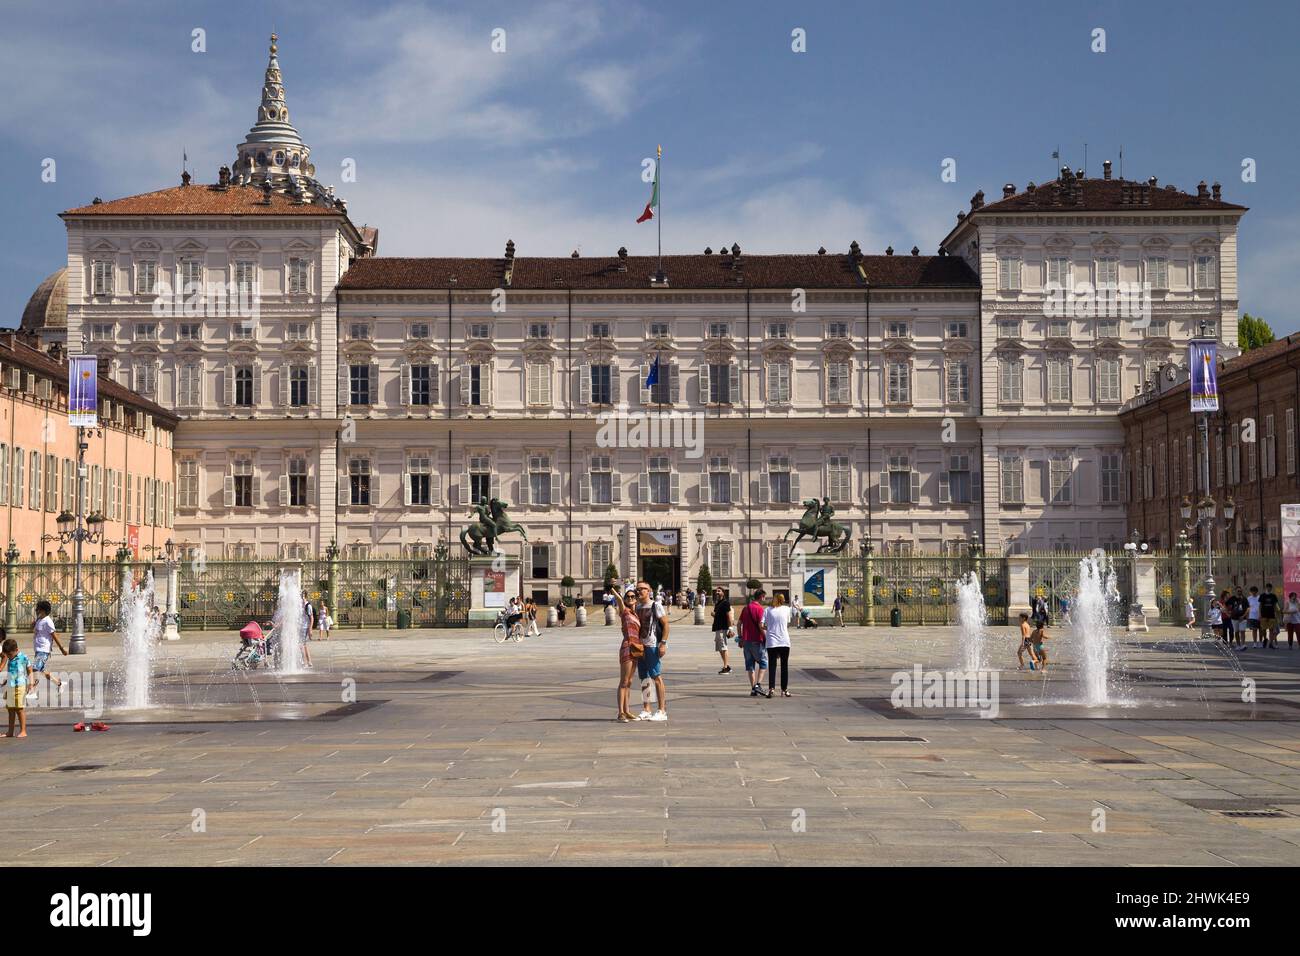 Torino, Italy - August 14, 2021: Royal Palace from Piazza Castello, Turin, Italy. Stock Photo